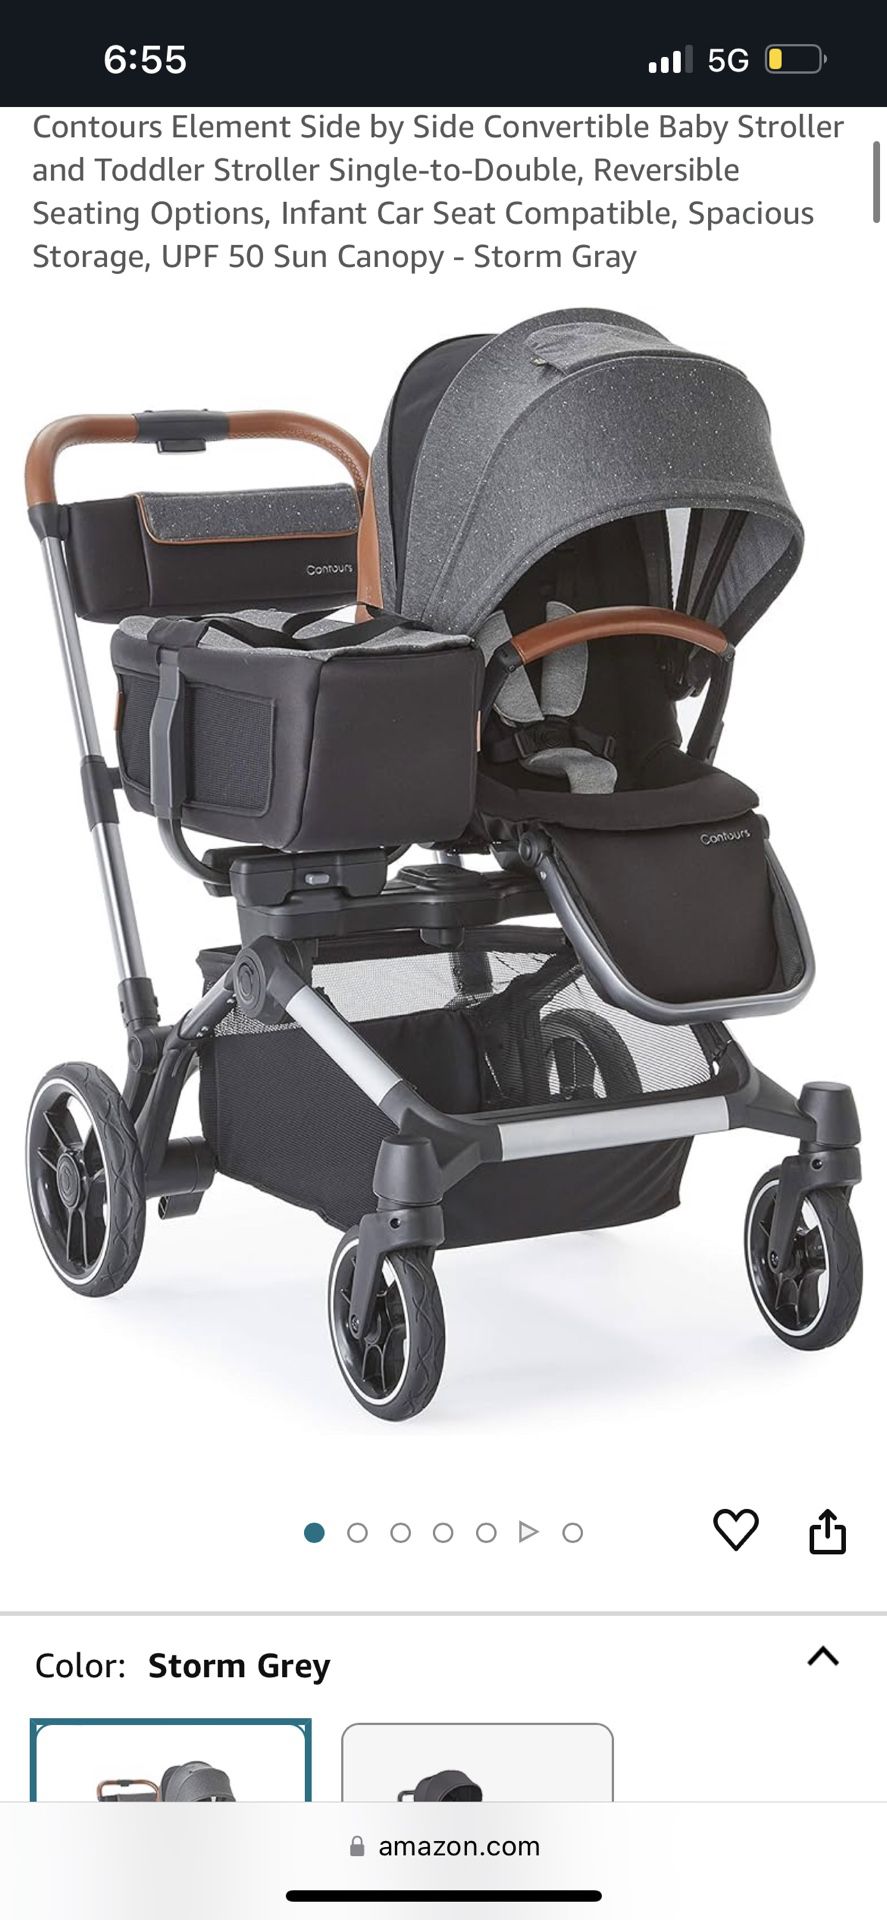 Contours Element Side by Side Convertible Baby Stroller and Toddler Stroller Single-to-Double